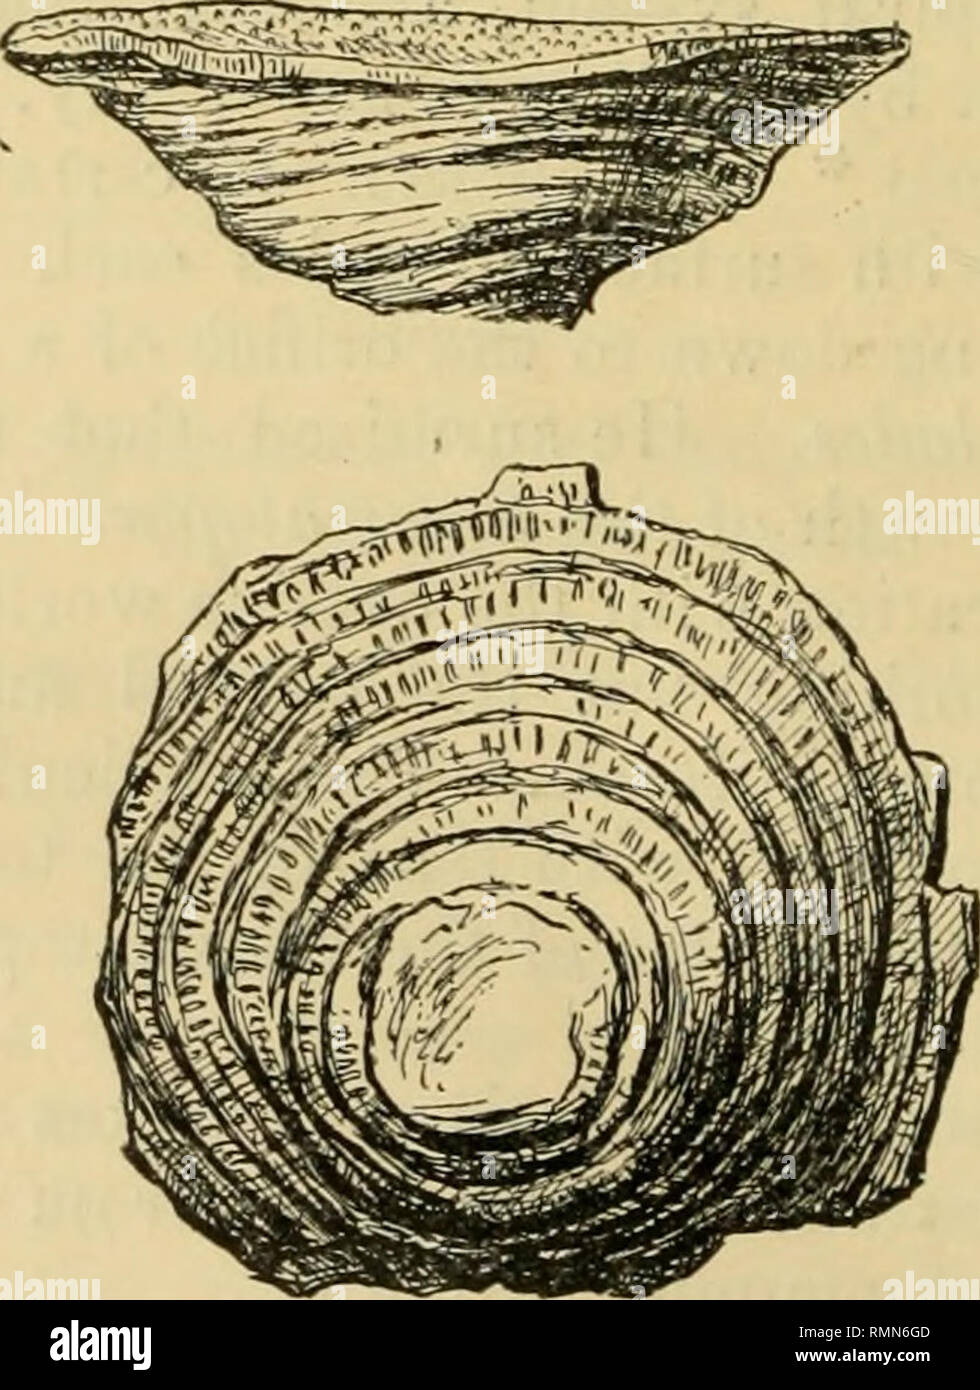 . The Annals and magazine of natural history; zoology, botany, and geology. Natural history; Zoology; Botany; Geology. Orbitolites complanata, Lamarck, showing central and circumambient chamber and succeeding spirals divided into segments. X 35. (From Carpenter, ' Challenger ' Report on Orbitolites, pi. vi. fig. 2.) Fiff. 2.. Lahechia conferta. Silurian, Gothland. Young specimens : side view and view of under surface; spiral growth indicated. Natural size. The extension in the horizontal plane partly takes place by the formation of a central chamber in the course of some particular coil, but m Stock Photo